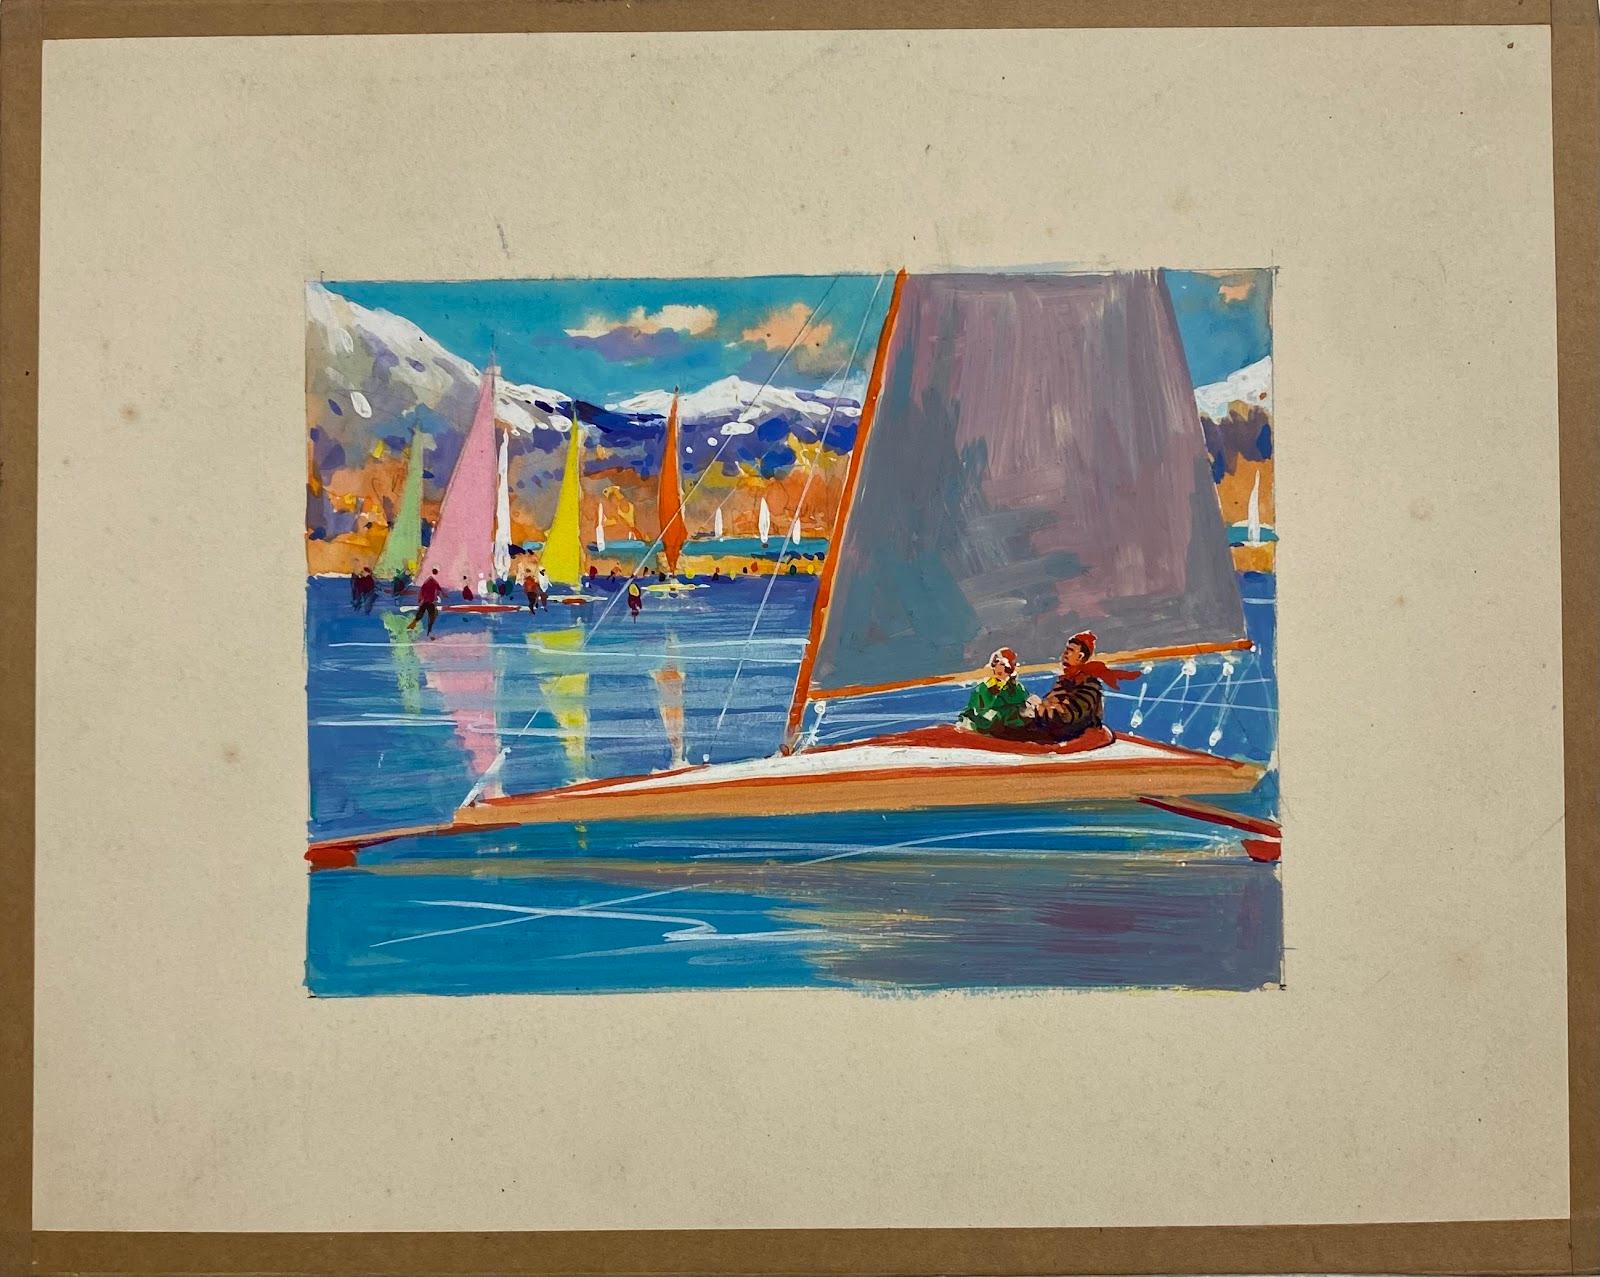 British Mid 20th Century Impressionist Painting Multi-Color Summer Boat Race  - Art by Frank Duffield